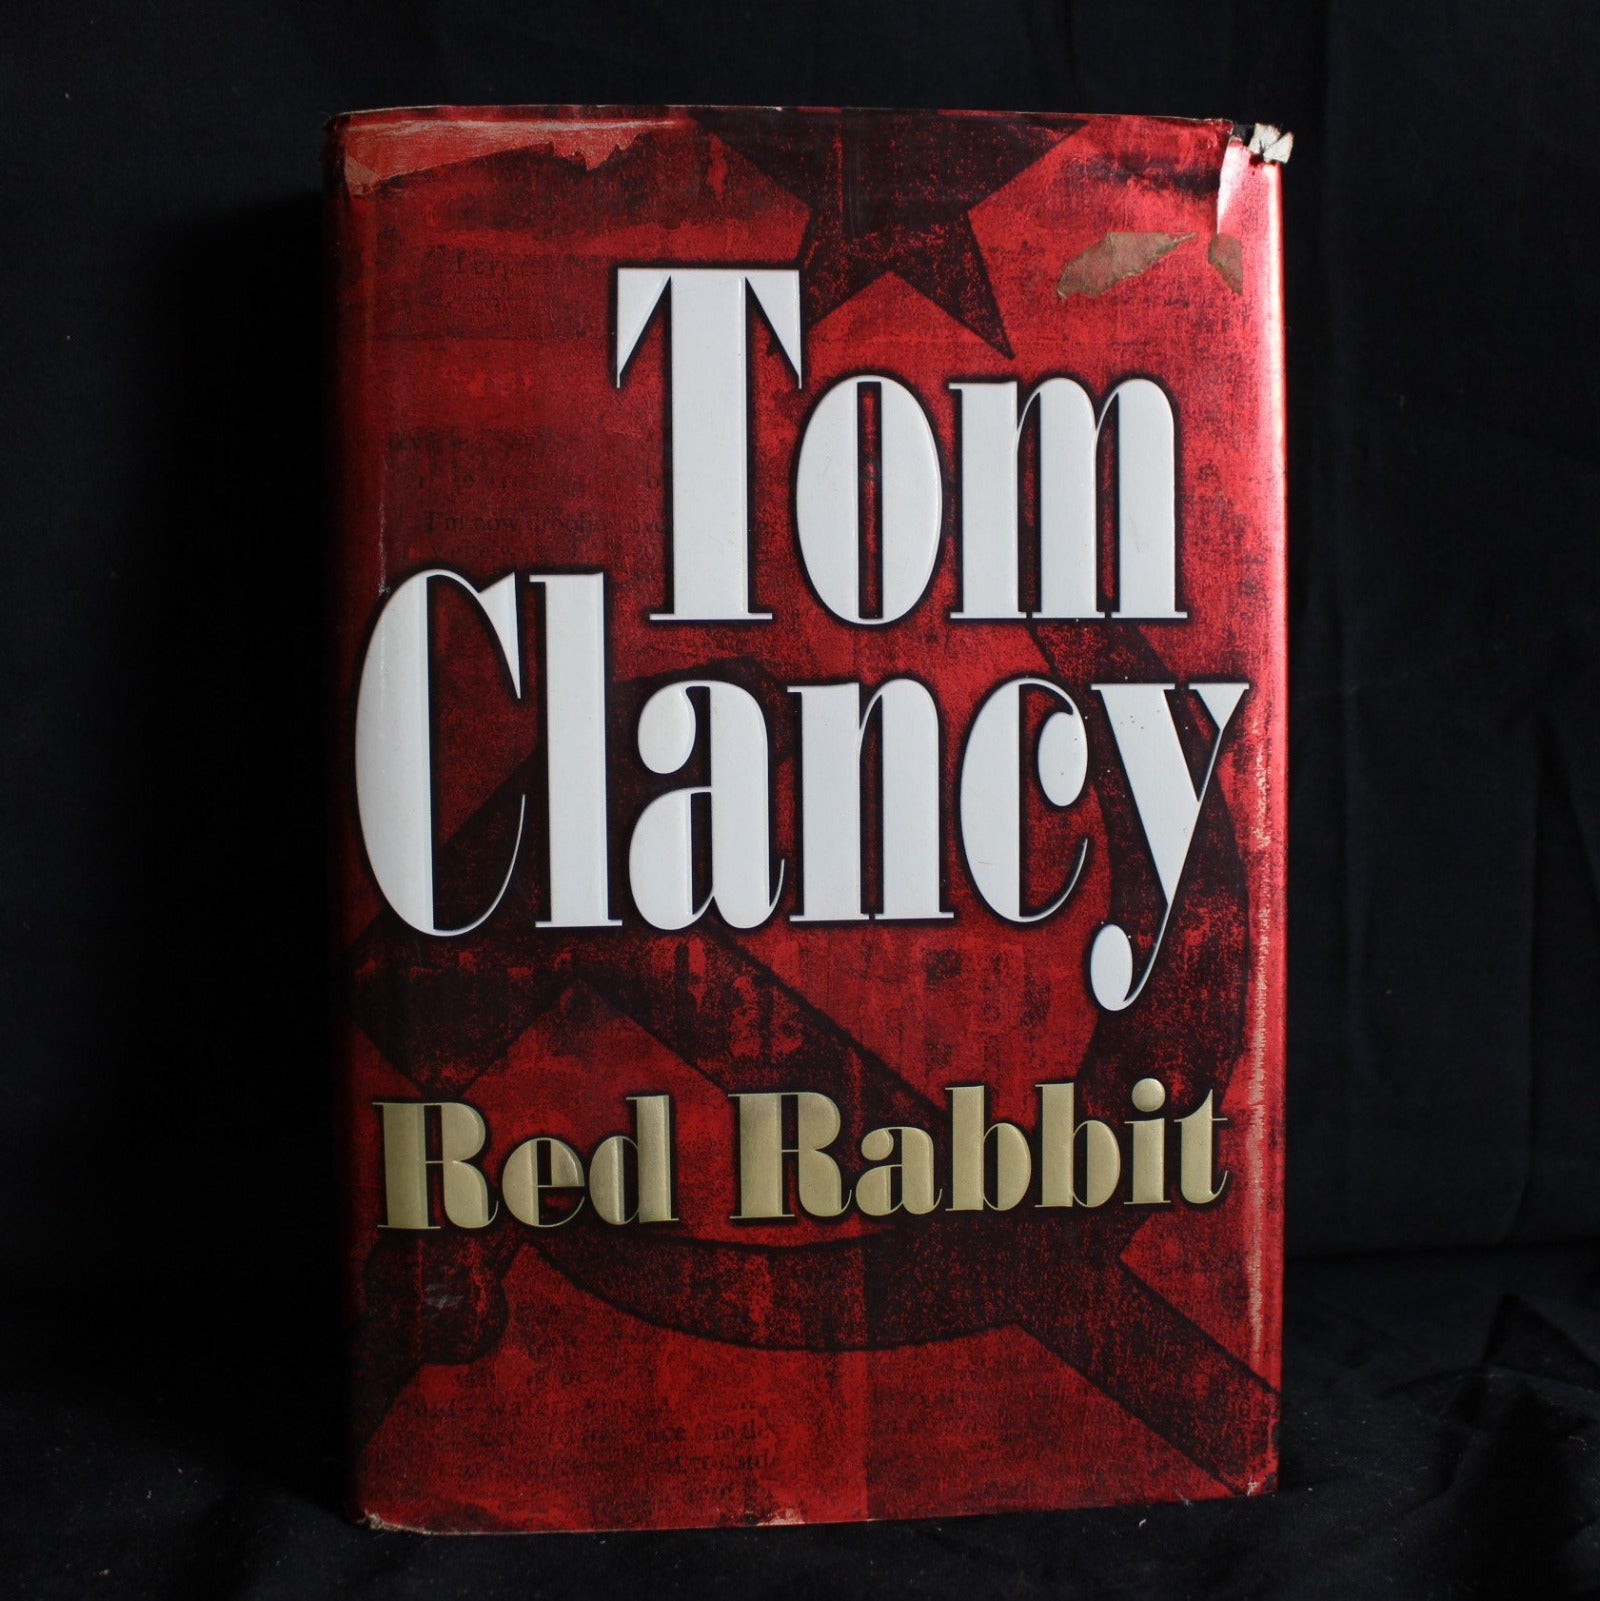 Hardcover First Edition Red Rabbit by Tom Clancy, 2002